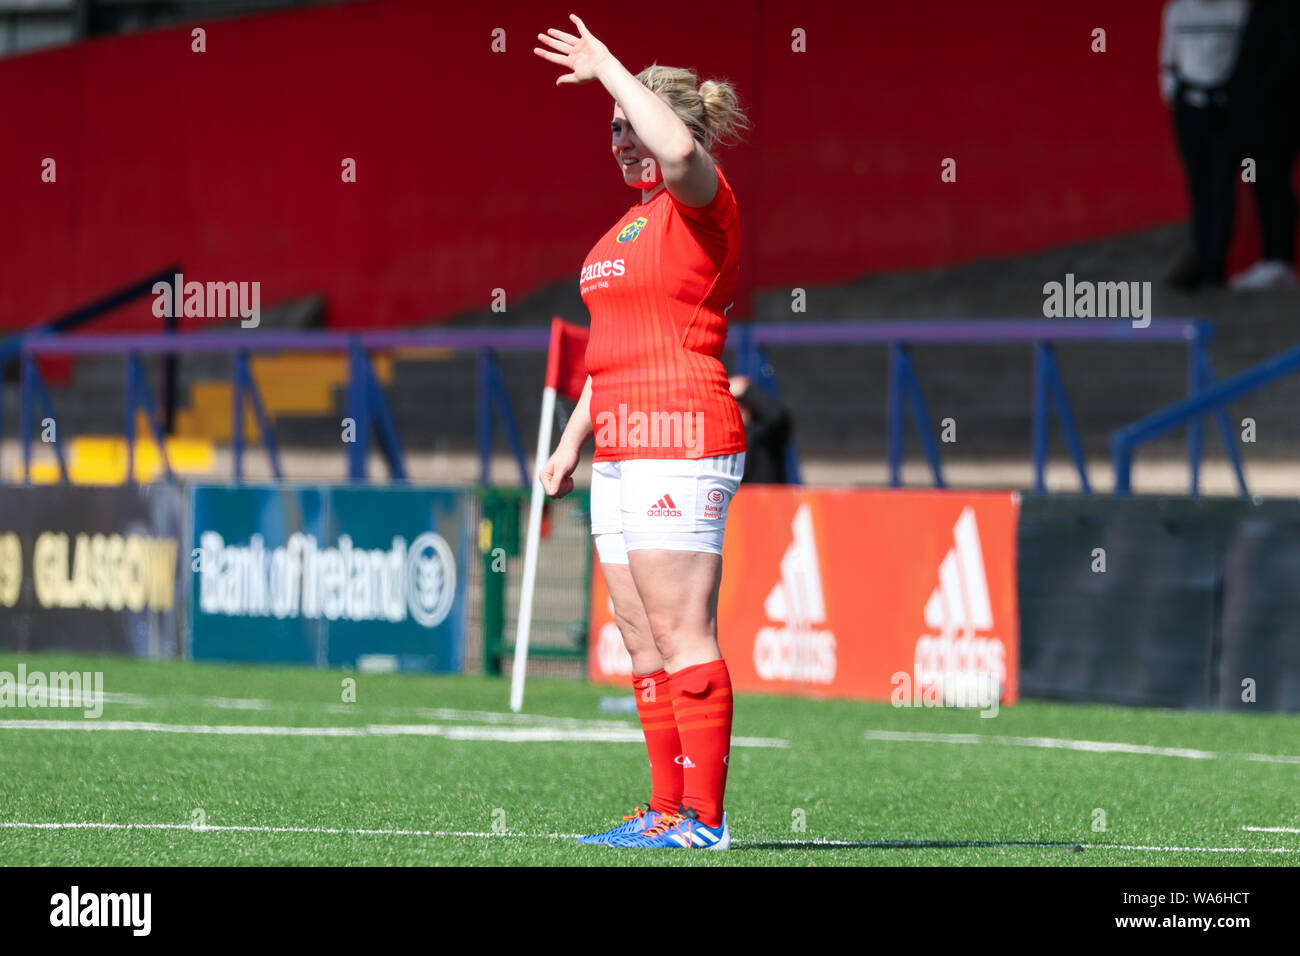 August 17th, 2019, Cork, Ireland - Action from the Munster Women Rugby (38) vs Ulster Women Rugby (12) match at the Irish Independent Park. Stock Photo